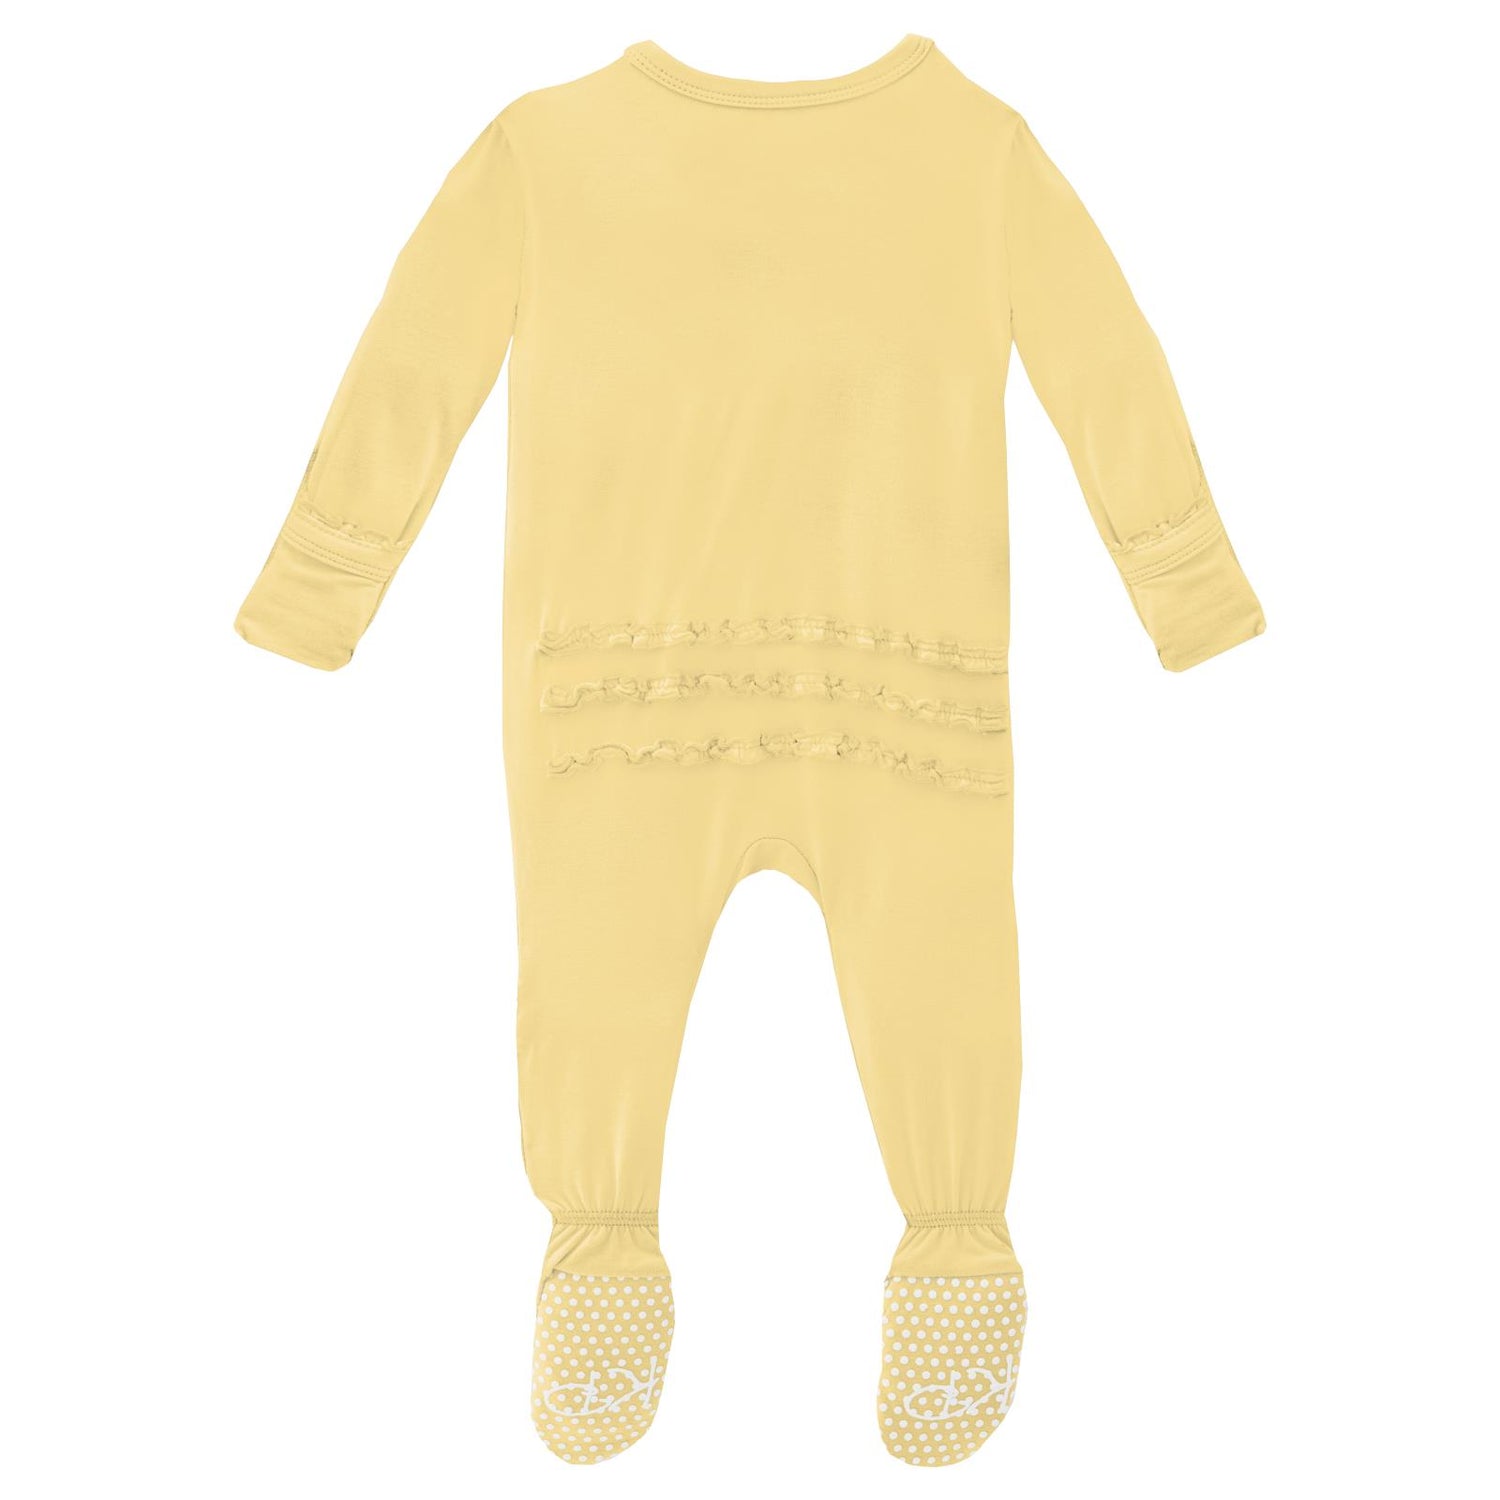 KicKee Pants Footie with Zipper - Wallaby Bees, 6-9 Months